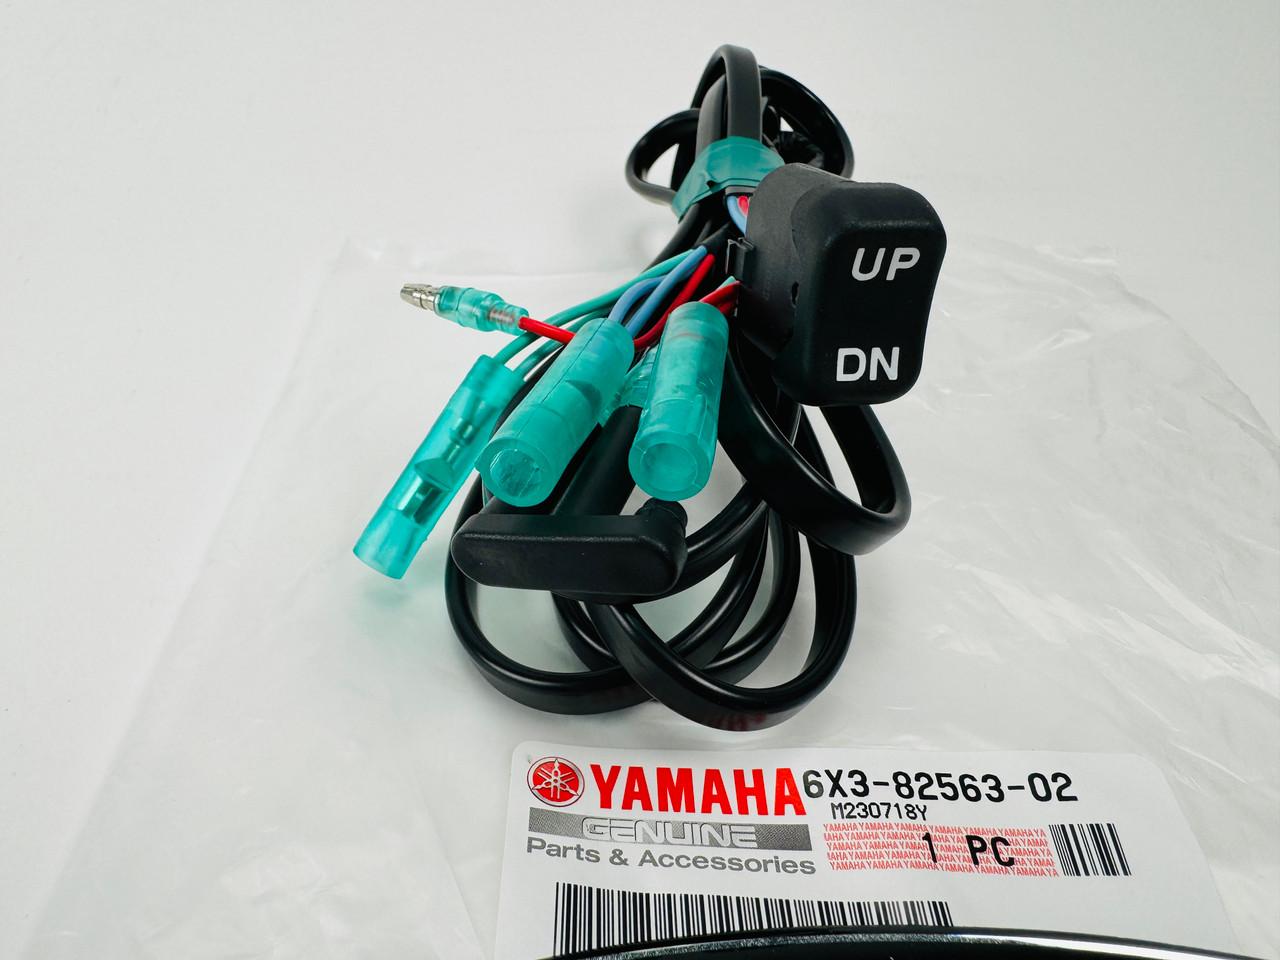 $106.99* GENUINE YAMAHA TRIM & TILT SWITCH 6X3-82563-02-00  *In Stock And Ready To Ship!